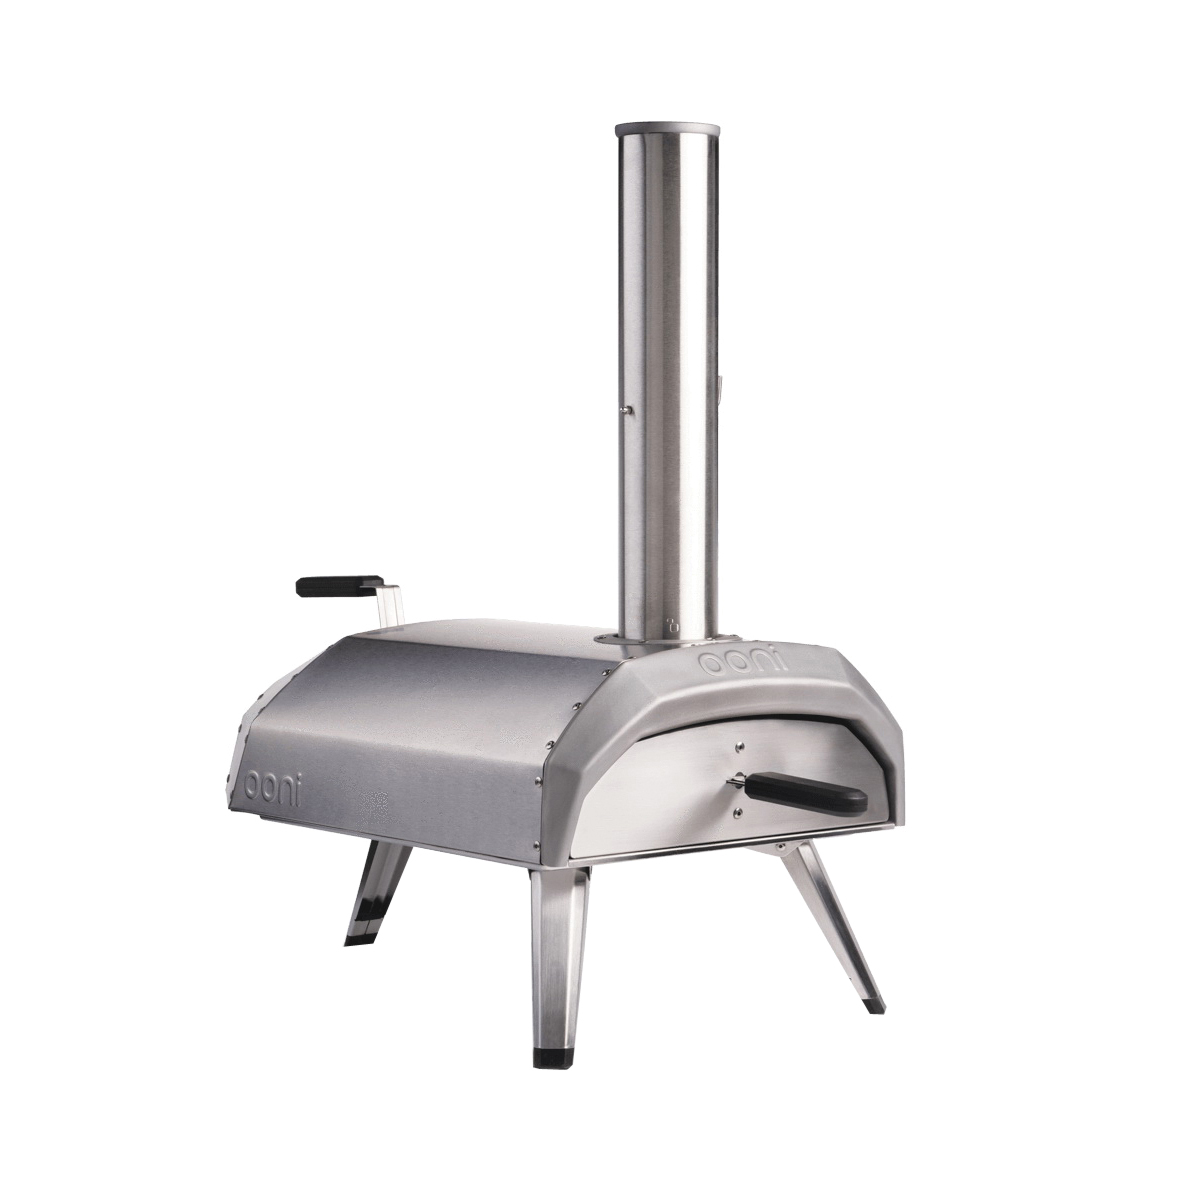 Ooni Karu 12 UU-POA100 Multi-Fuel Pizza Oven, 15.7 in W, 26.6 in D, 28.7 in H, Glass Reinforced Nylon/Stainless Steel - 2